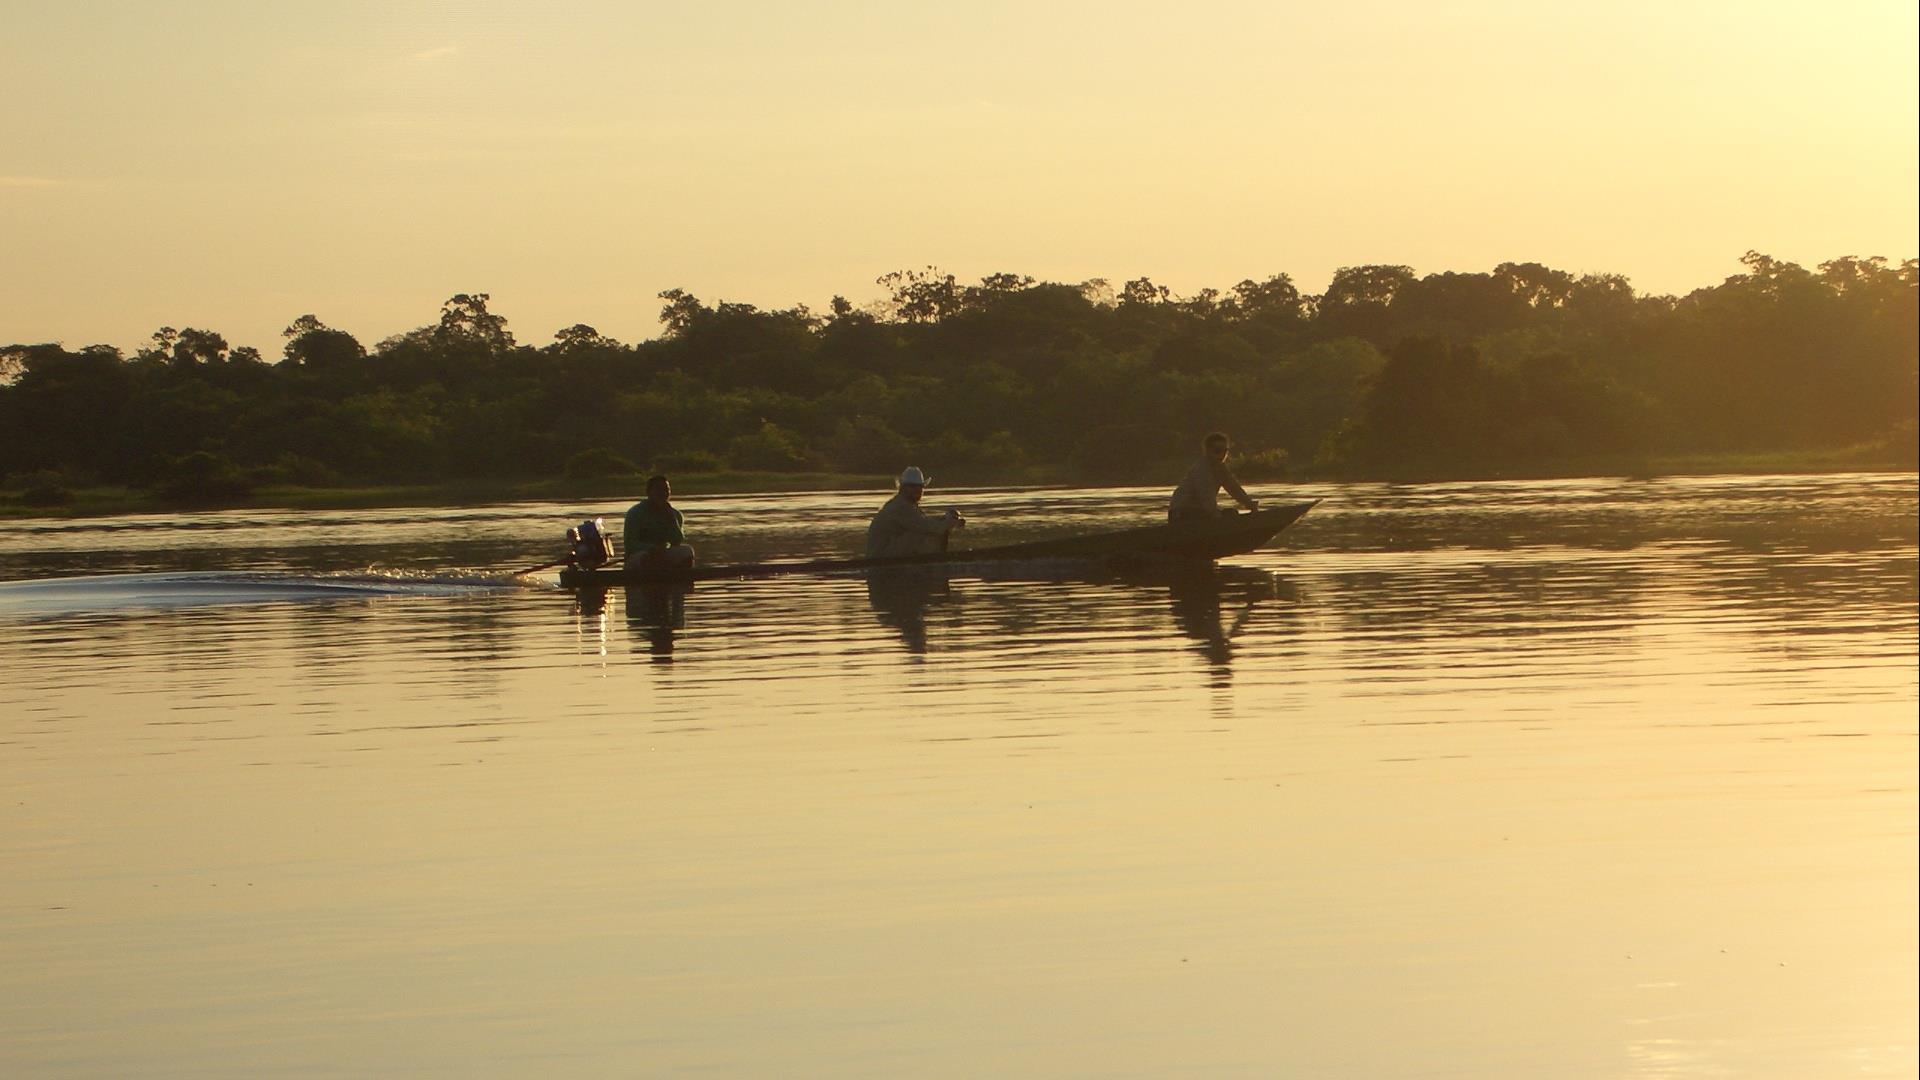 Local fishermen at Sunset in the Amazon Rainforest